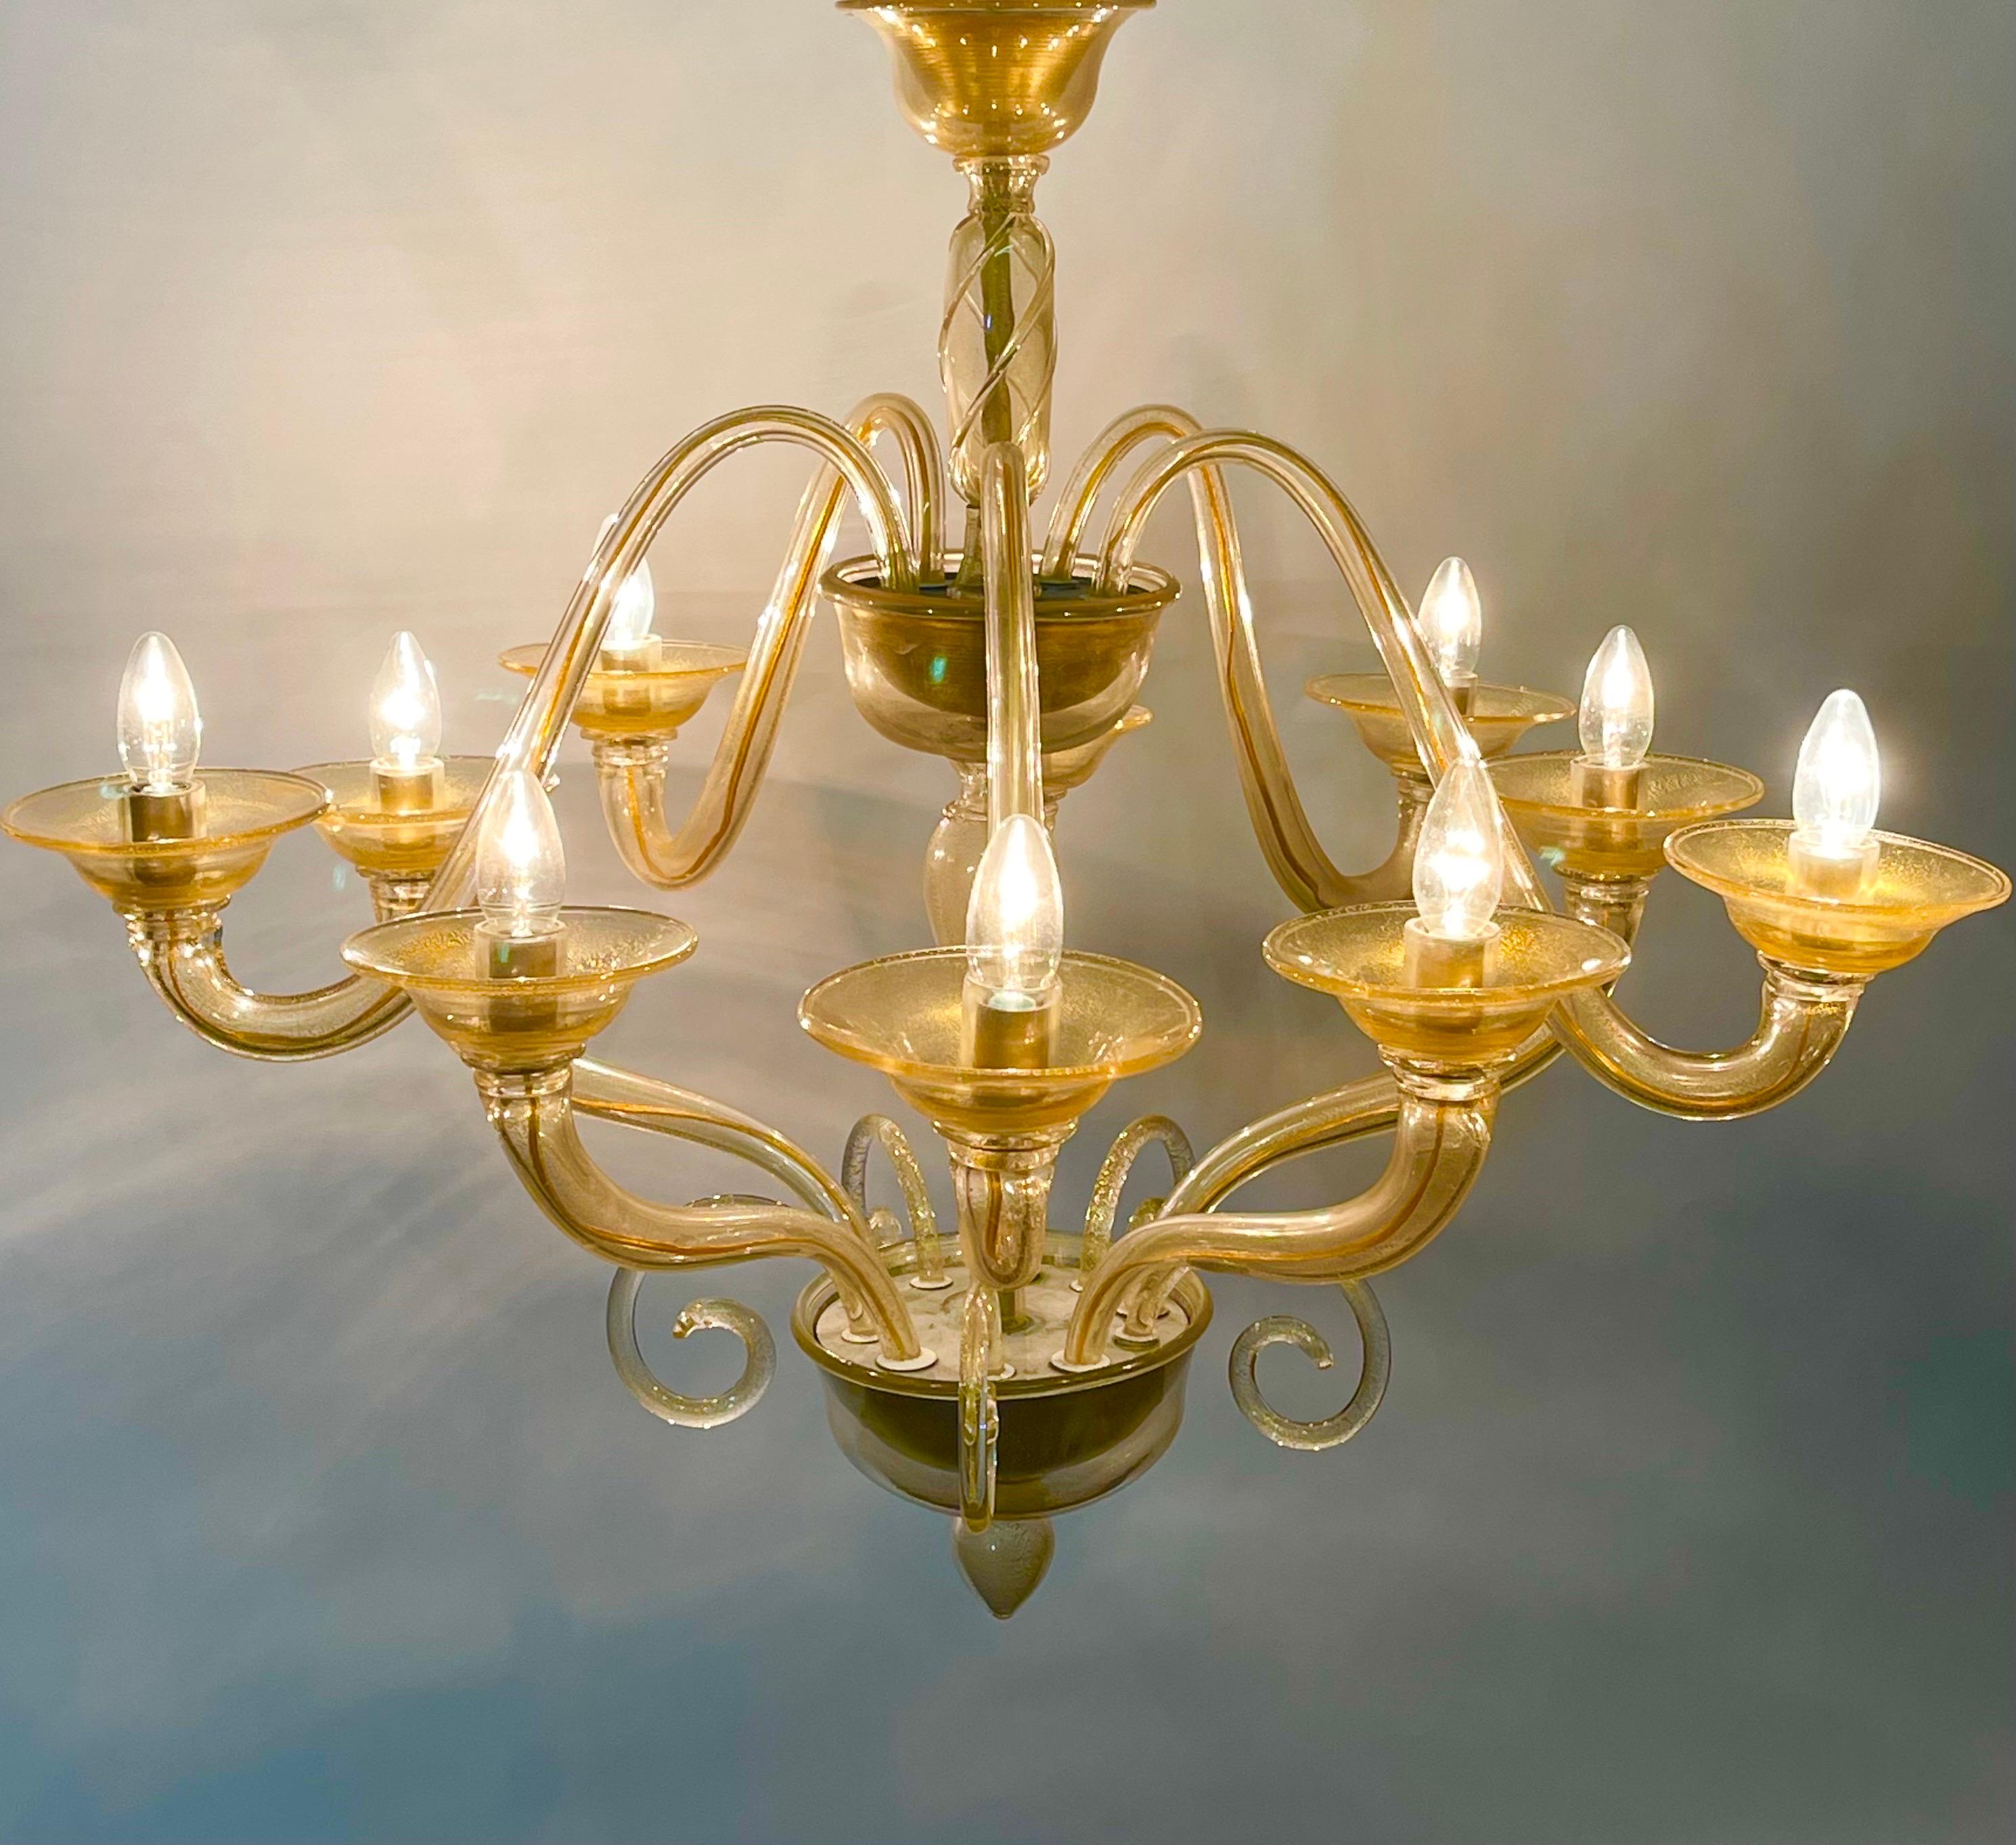 Gold Dusted Handblown Murano Glass Chandelier by Seguso, circa 1960s For Sale 4